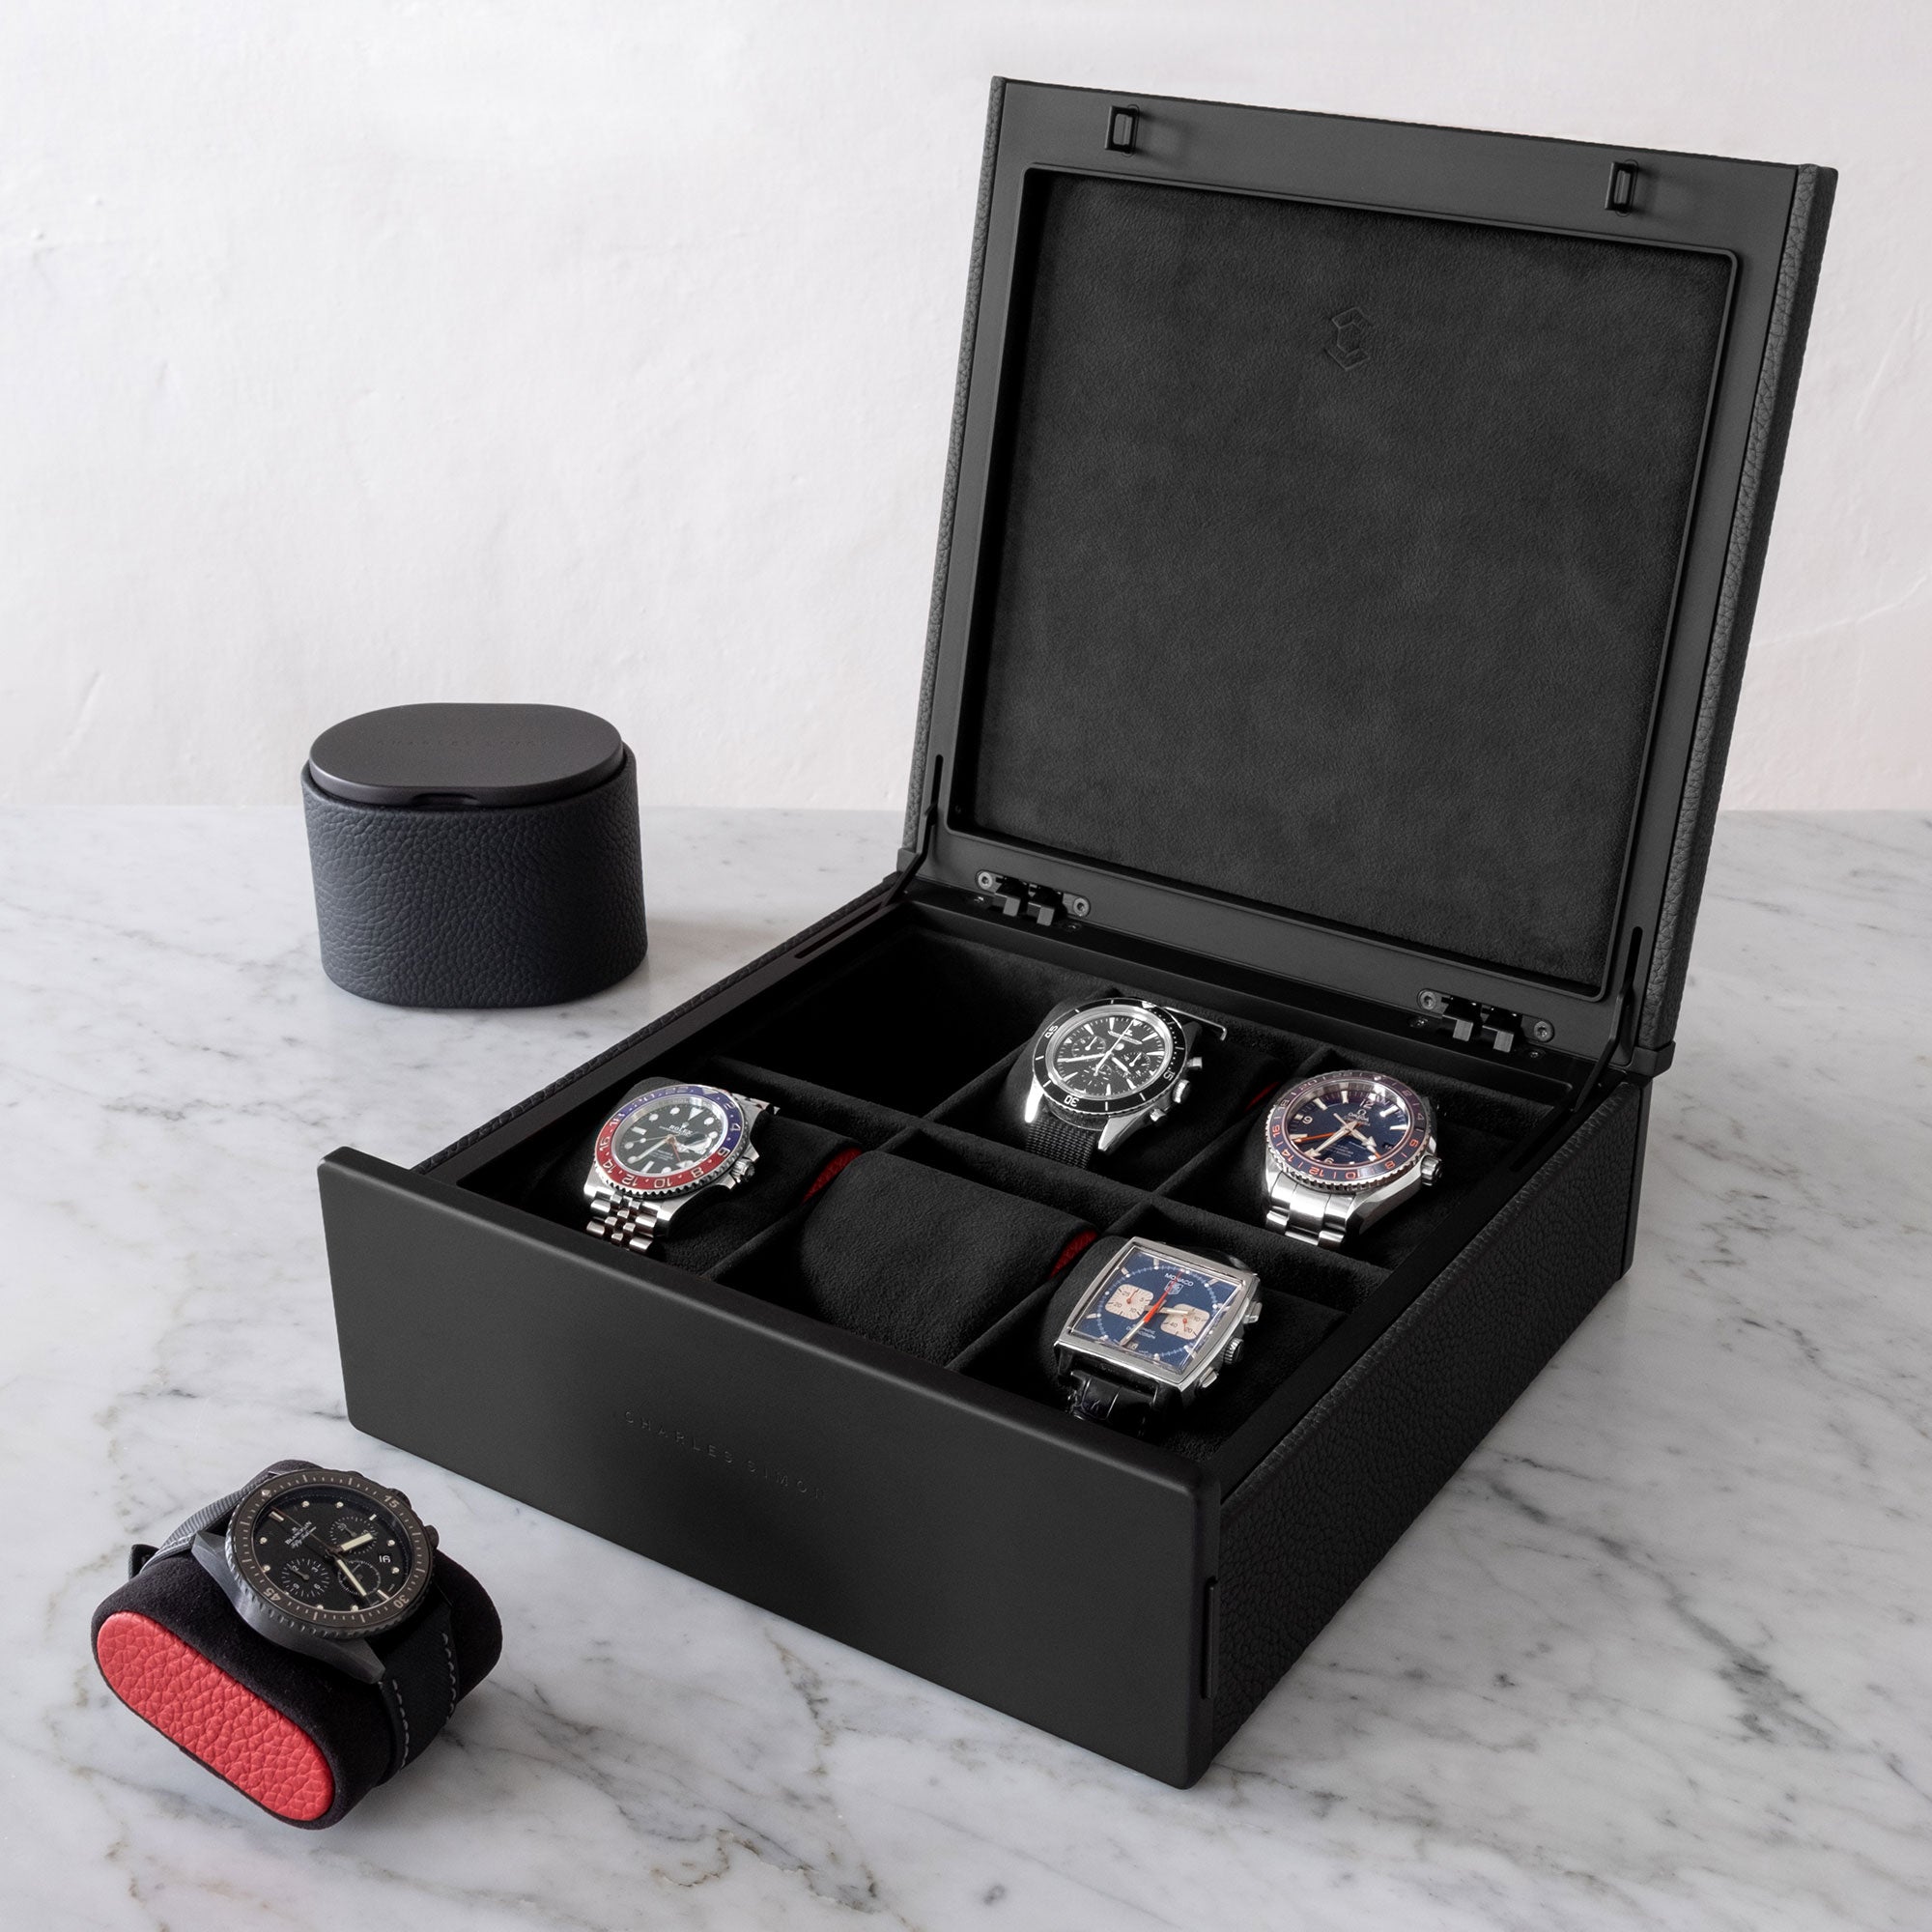 Lifestyle photo of open Spence watch box in black French leather storing luxury men's watches from Rolex, Omega, Jaeger Lecoultre and Tag Heuer. Omega Seamaster is placed in front of designer watch box on black watch cushion with red leather sides. Closed Theo watch roll in all black is placed in the background.